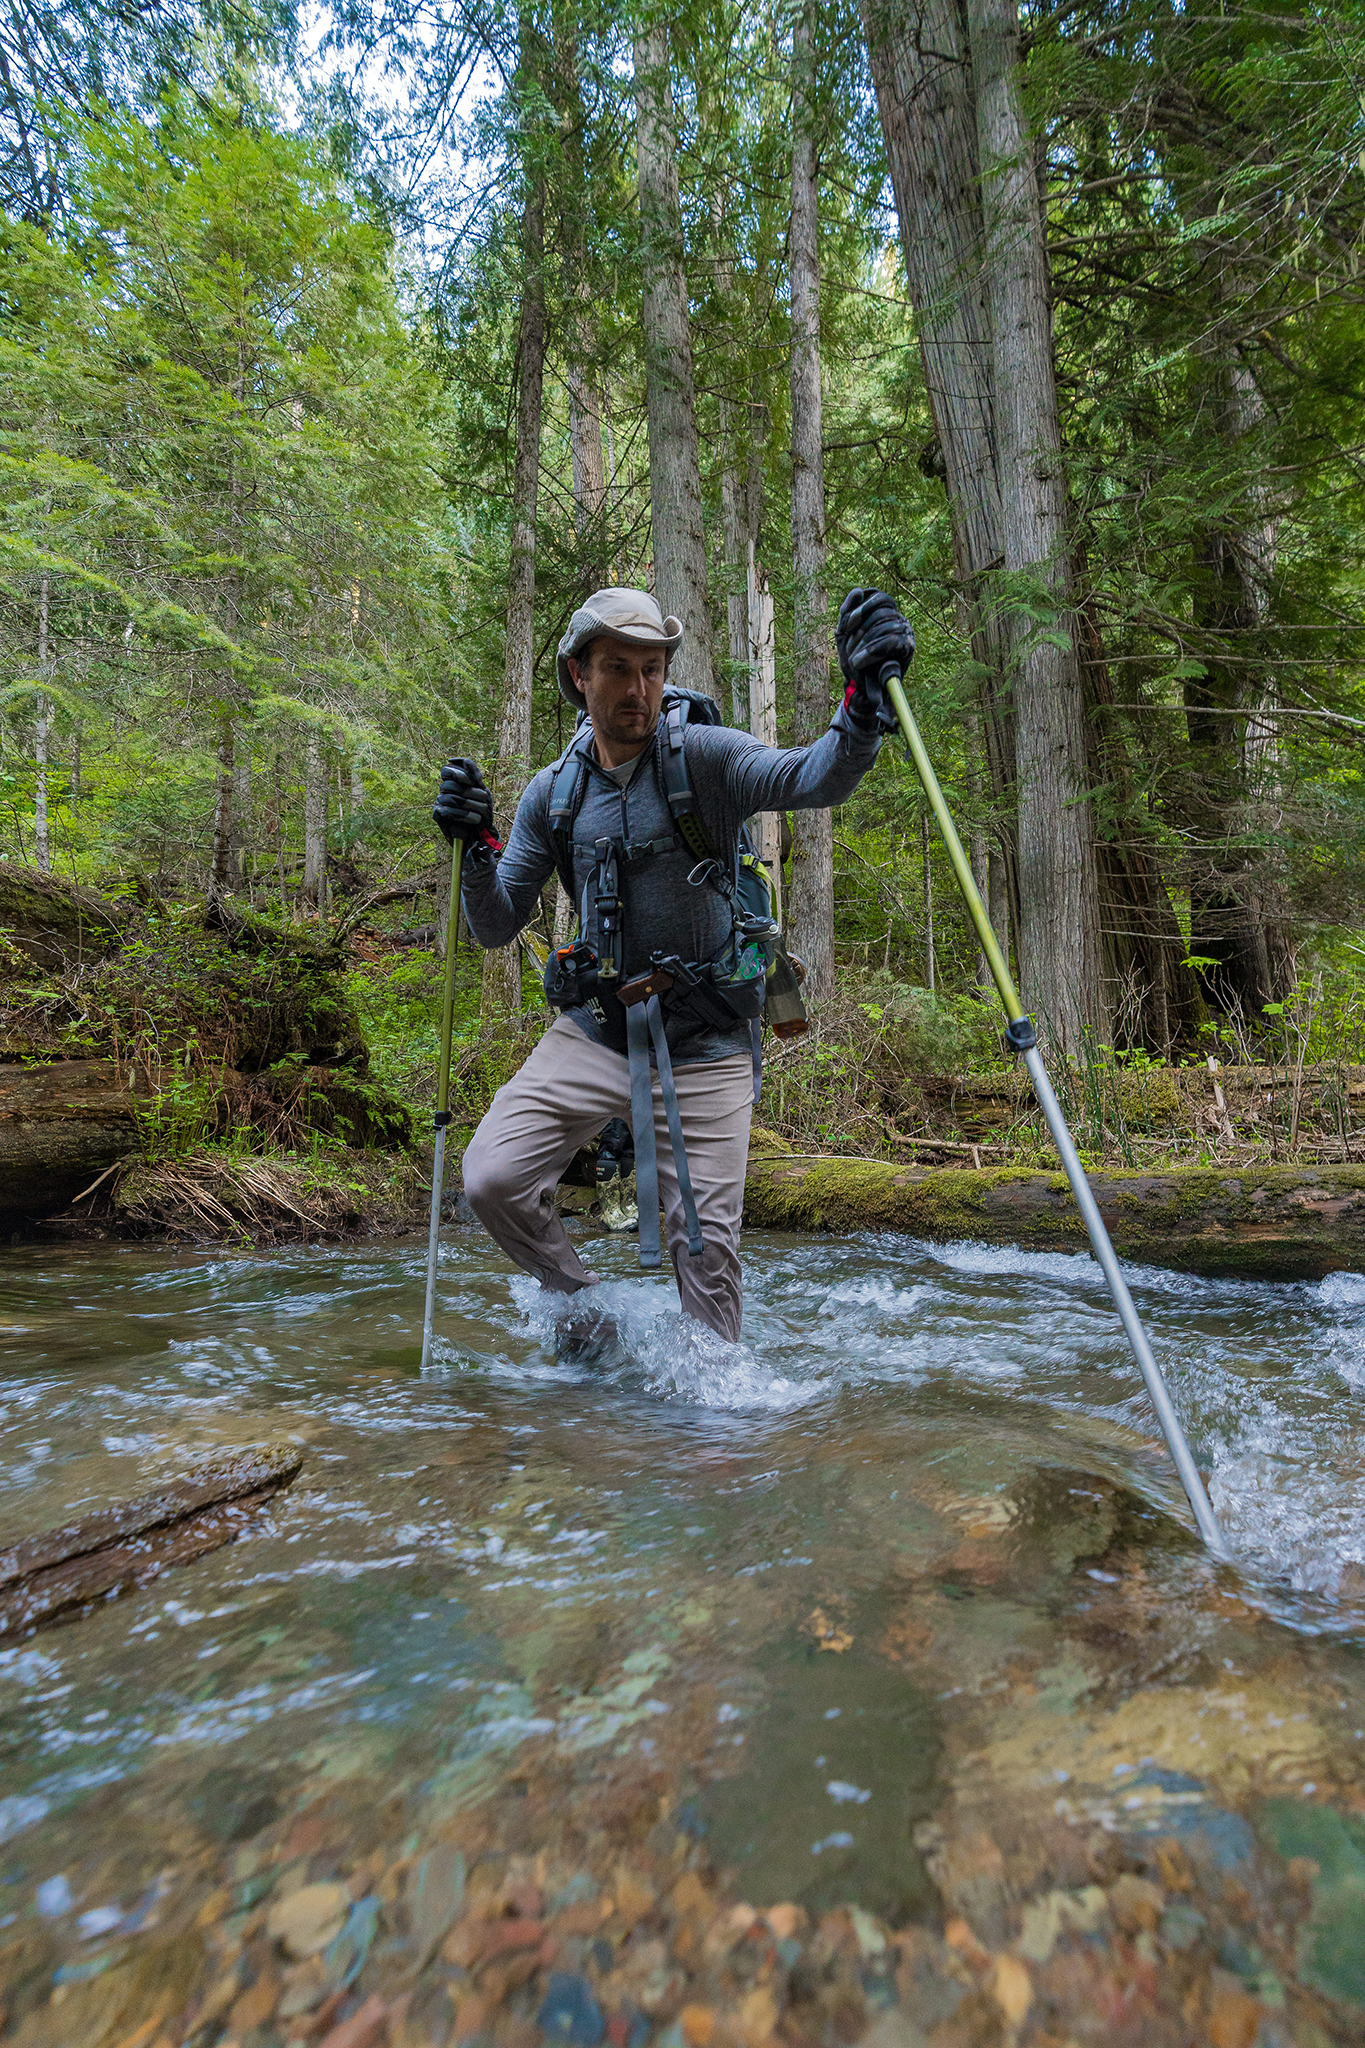 Michael Hollis carefully plants his trekking pole for stability while crossing the creek.
